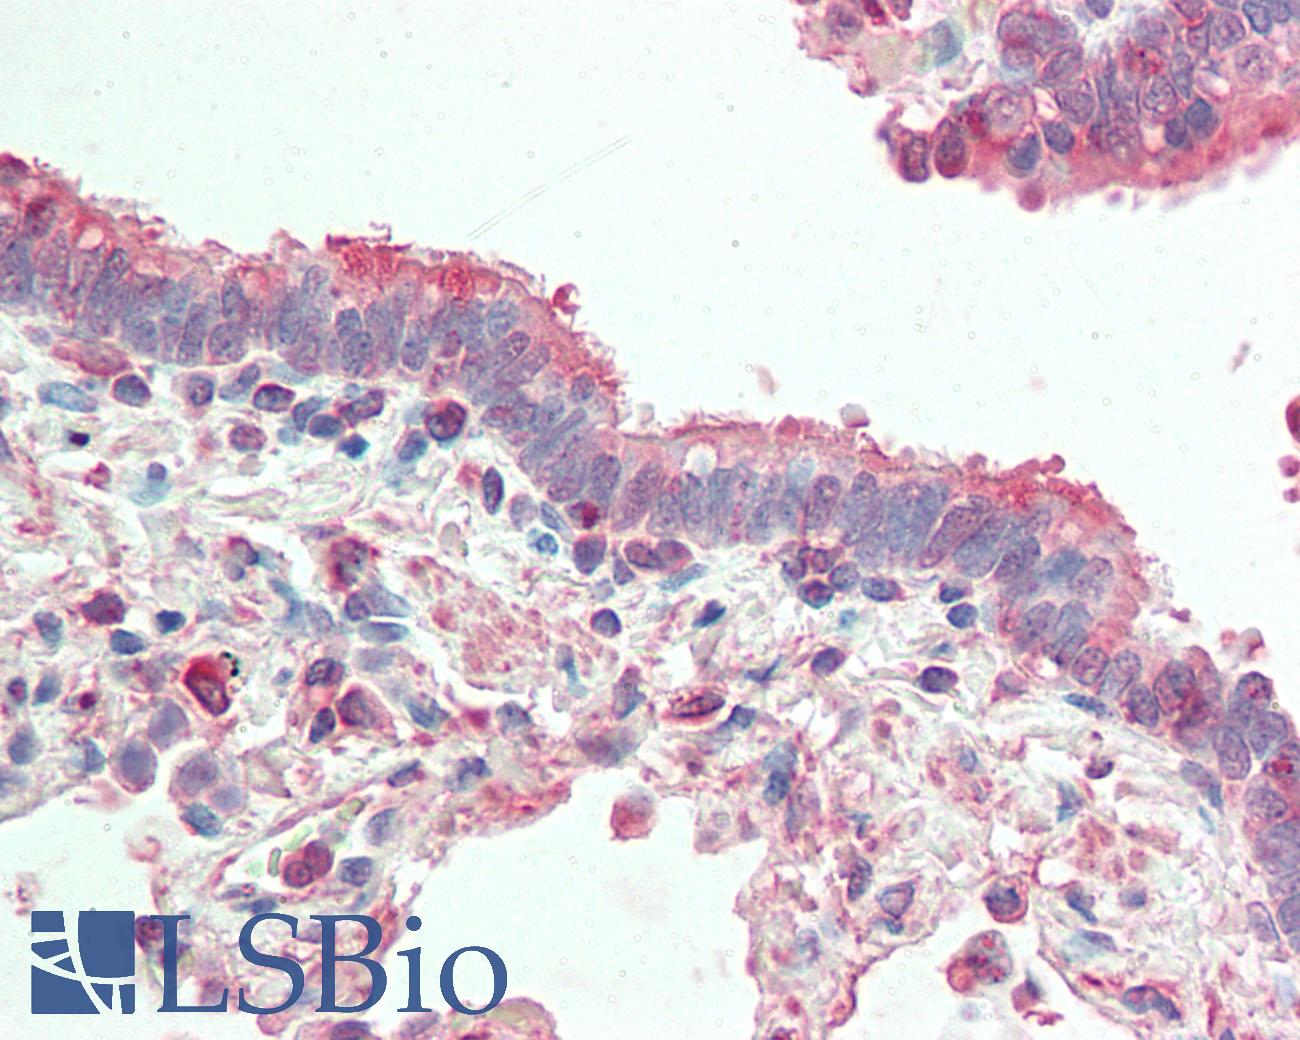 APG4B / ATG4B Antibody - Anti-APG4B / ATG4B antibody IHC staining of human lung, respiratory epithelium. Immunohistochemistry of formalin-fixed, paraffin-embedded tissue after heat-induced antigen retrieval. Antibody dilution 1:50.